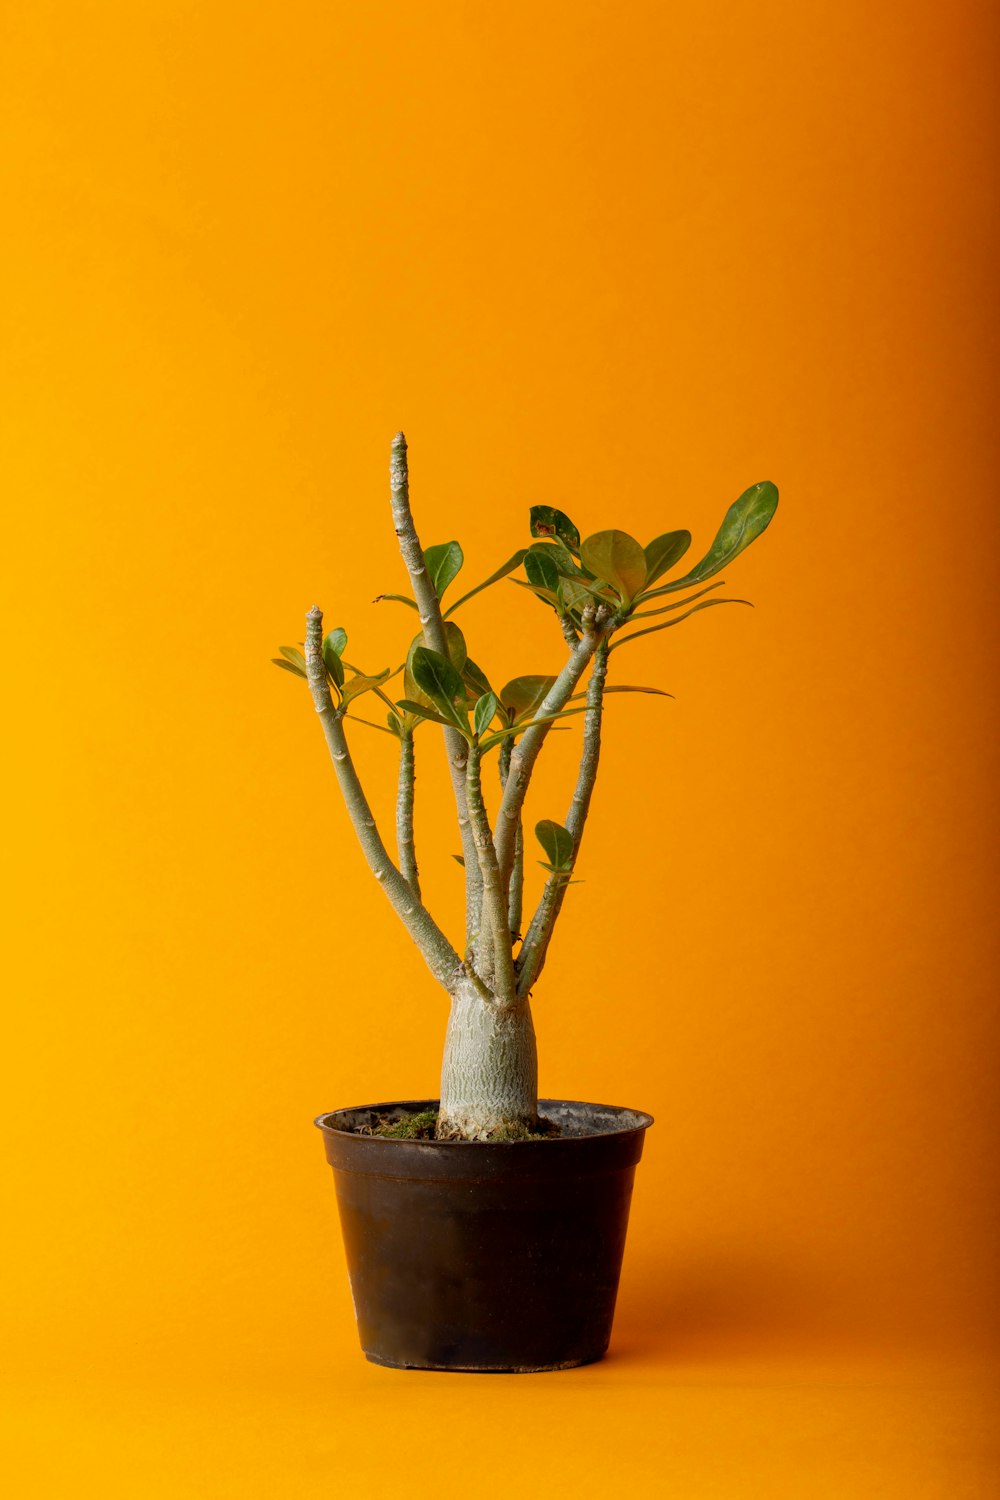 a small potted plant on a yellow background